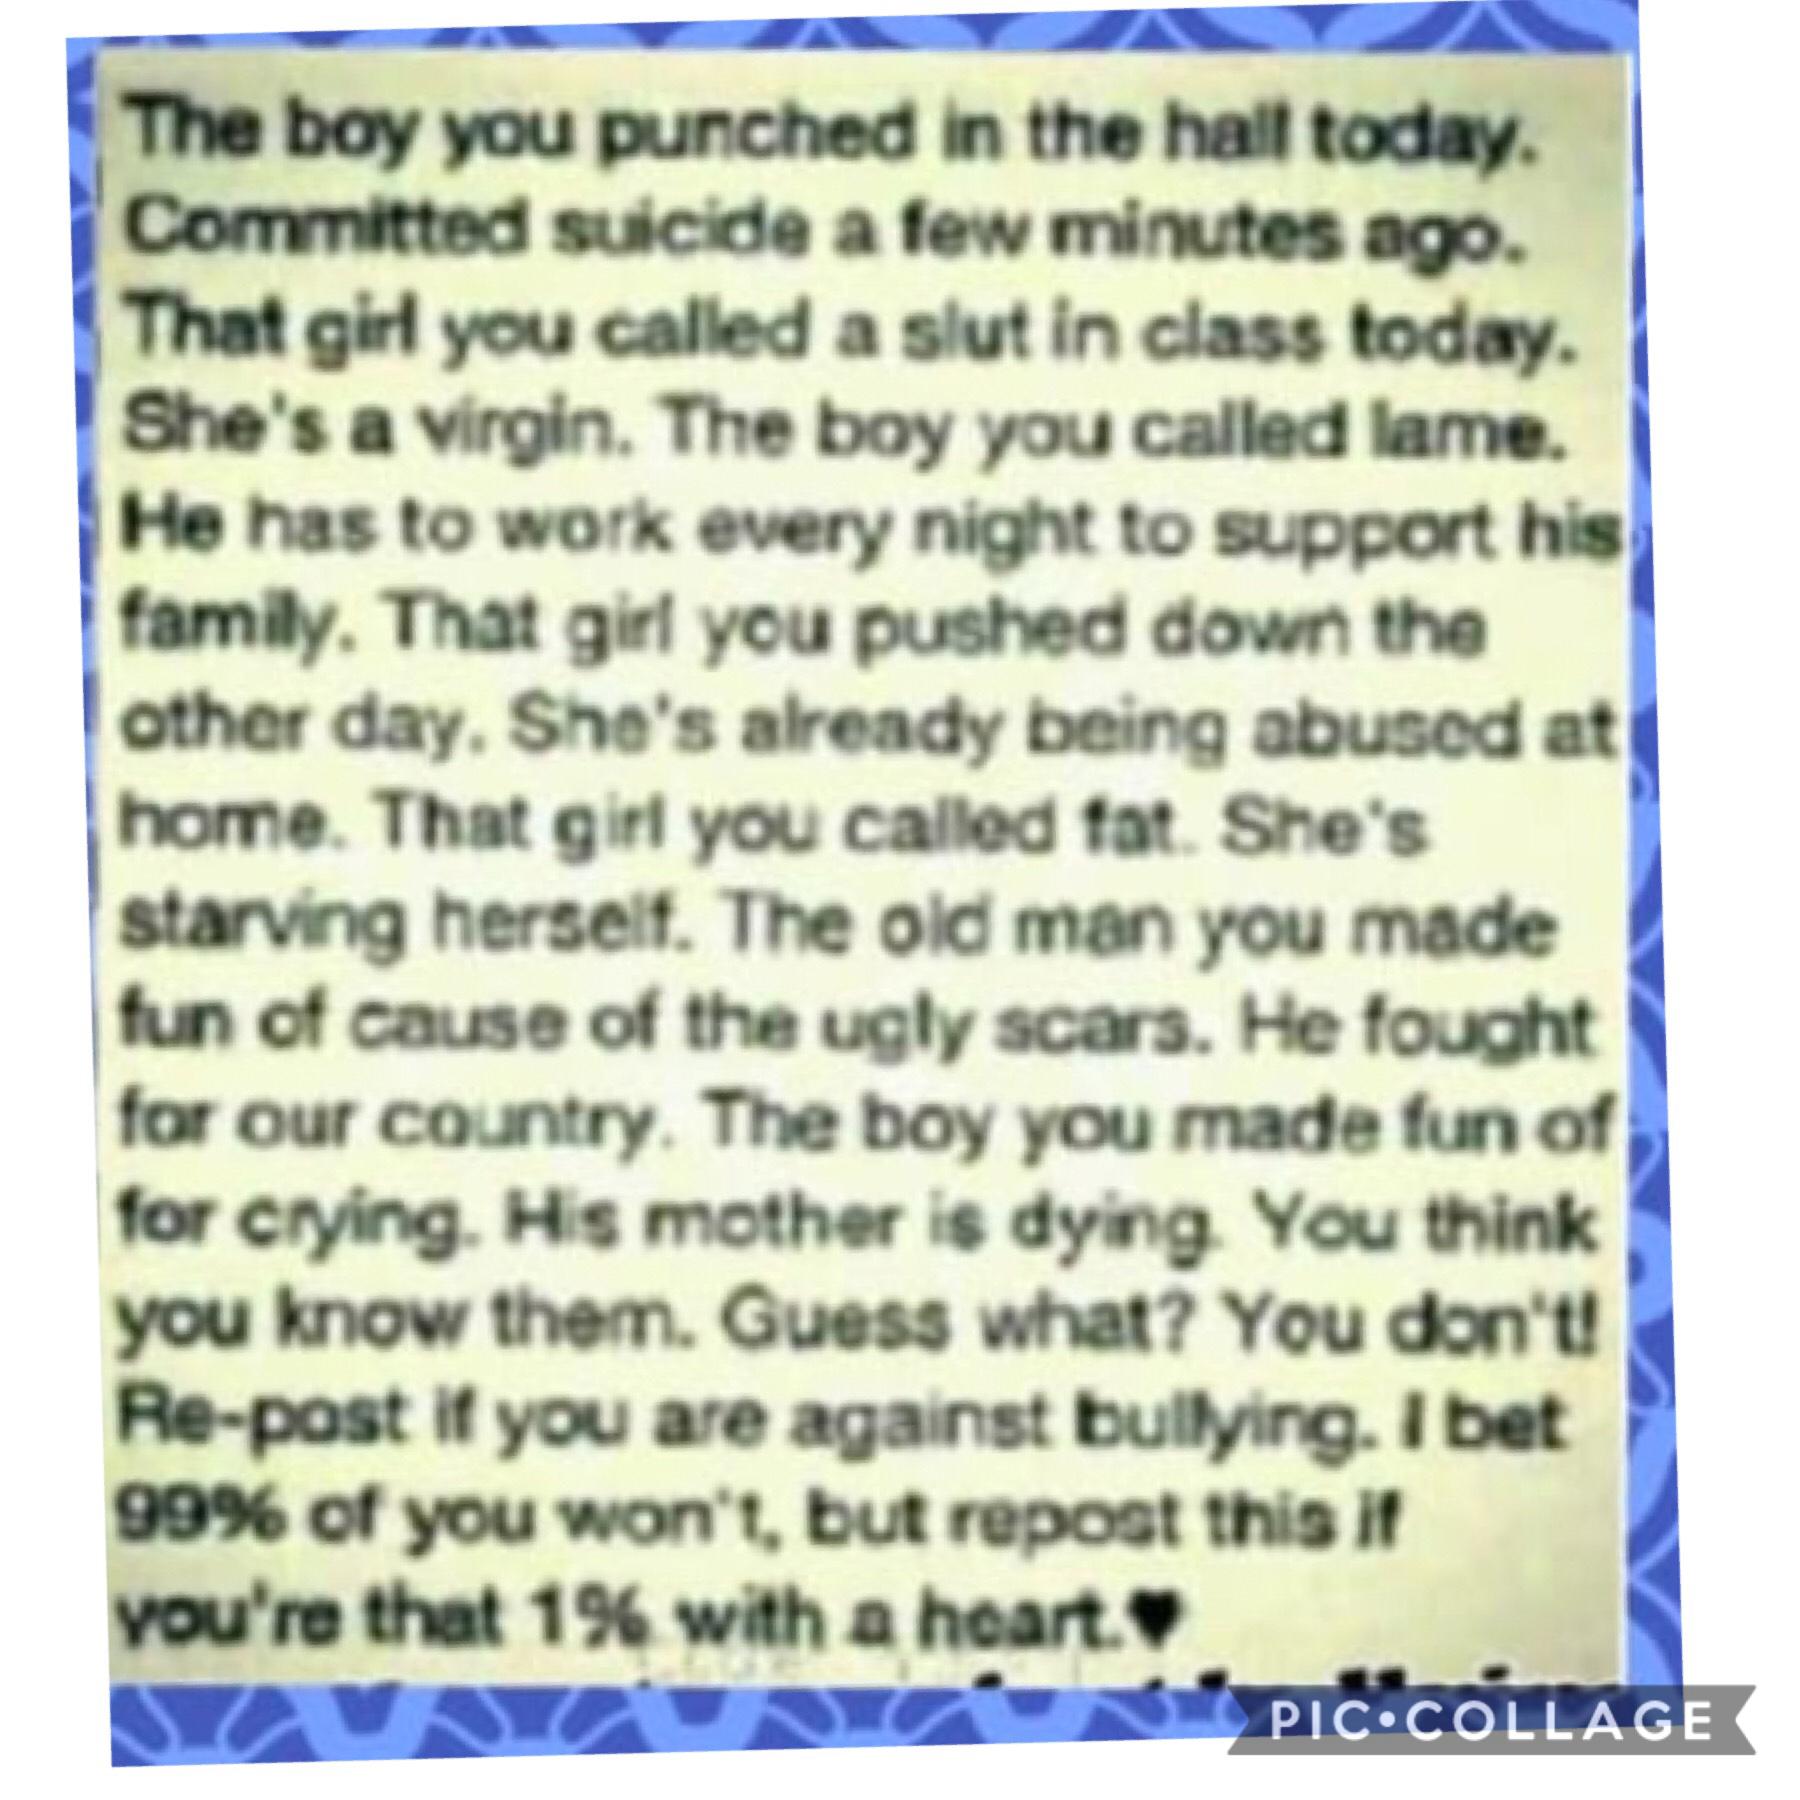 Shout out to sparkle_for_life22 ❤️
It takes guts to stand out to bullying and Ik exactly what bullying is as I’ve only just got out of it yet it’s still effecting me... bullying is wrong we need to make a stand 